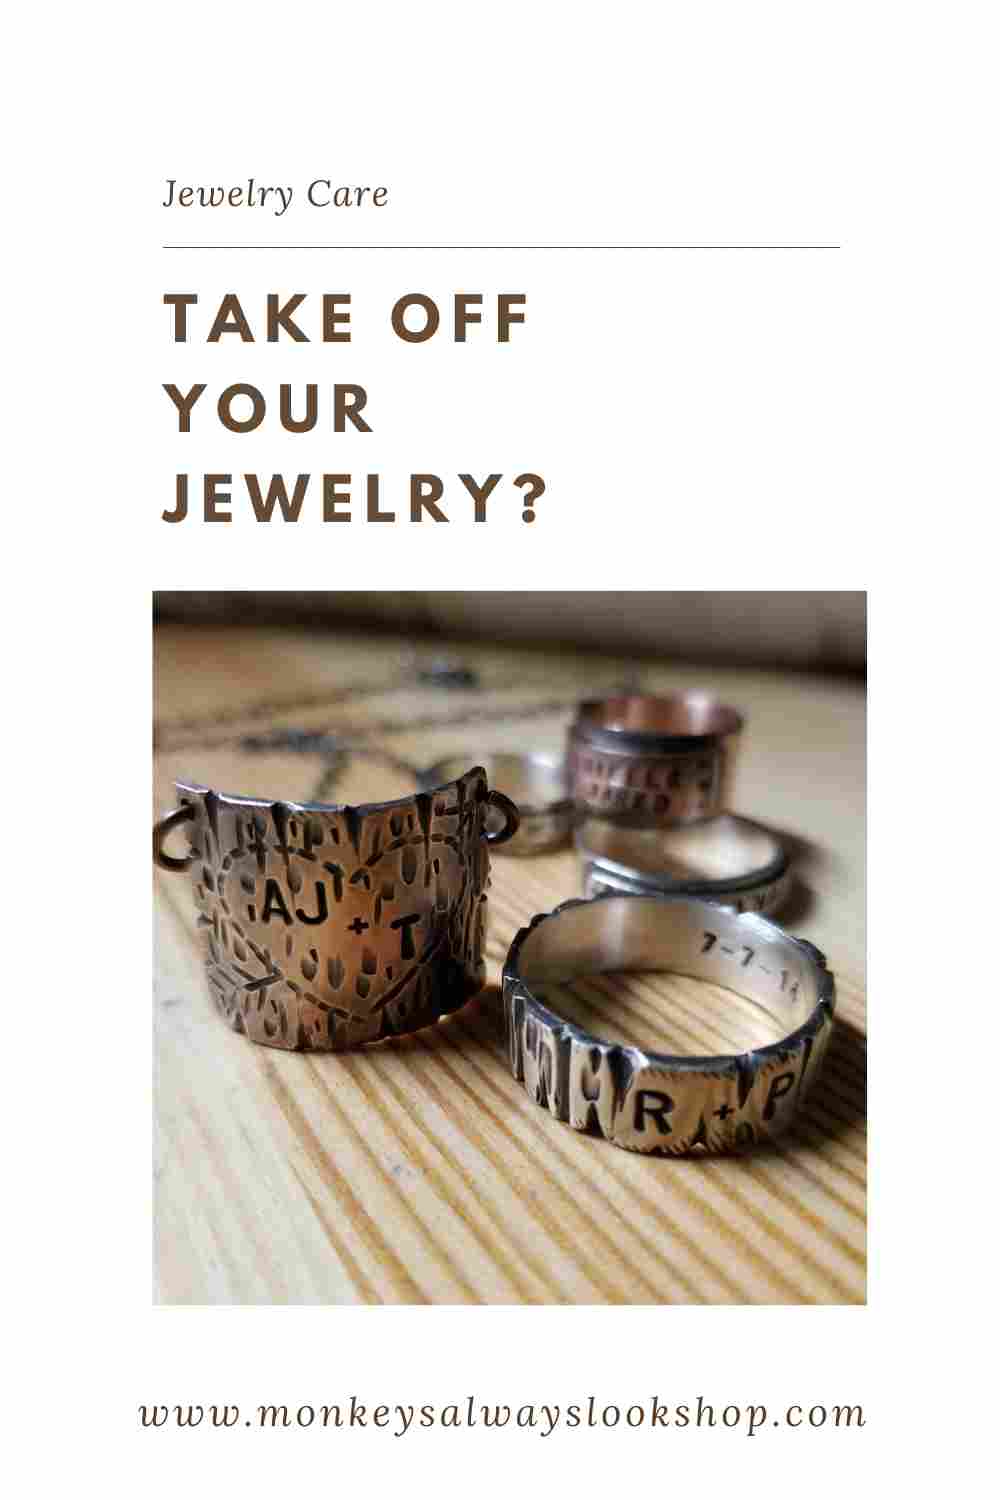 Take off your jewelry?